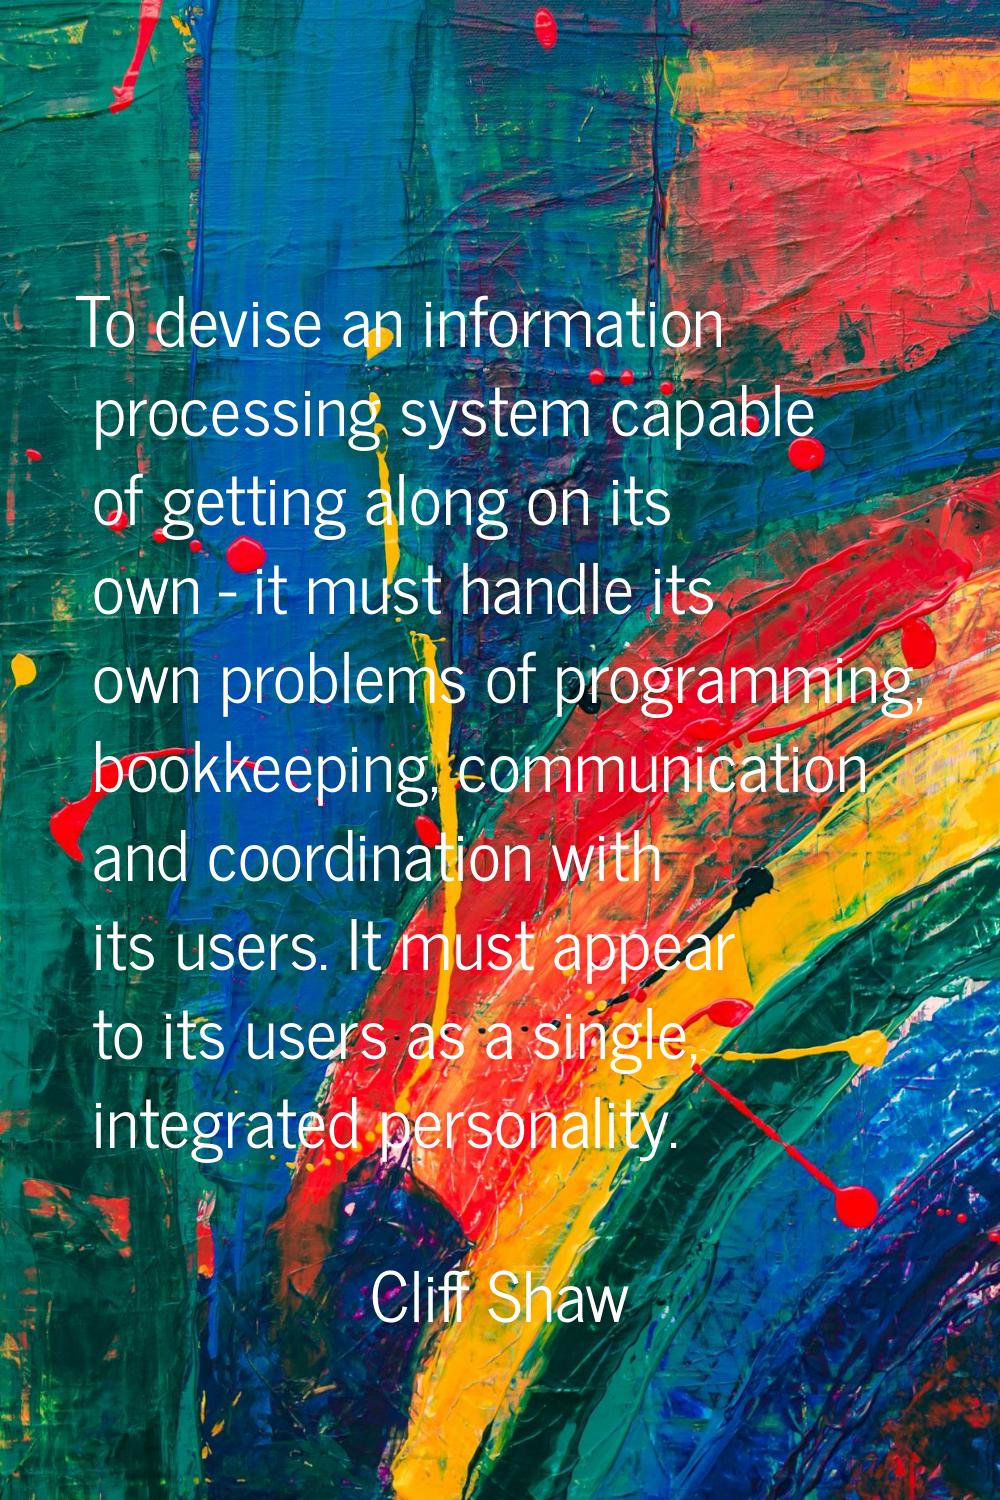 To devise an information processing system capable of getting along on its own - it must handle its